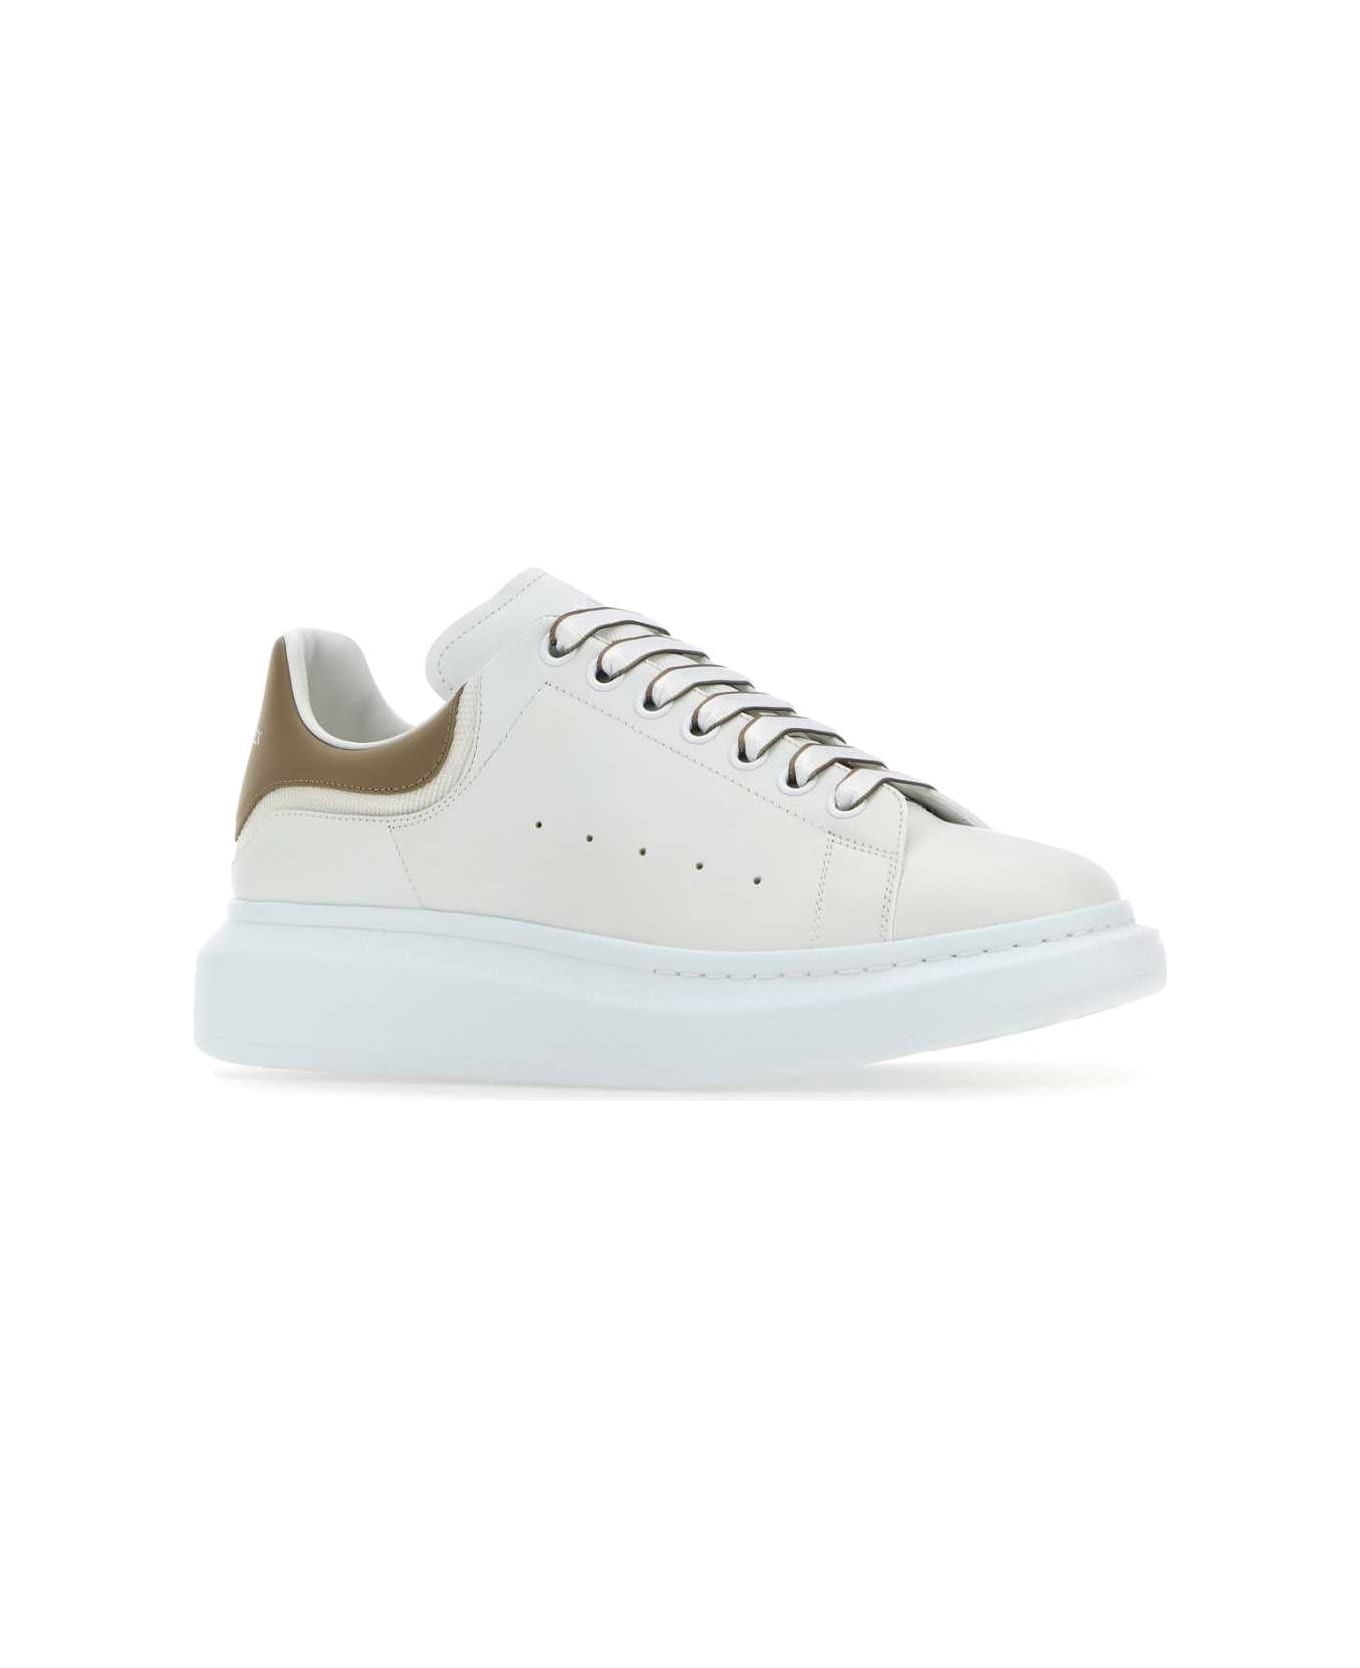 Alexander McQueen White Leather Sneakers With Dove Grey Leather Heel - WHITESTONE スニーカー